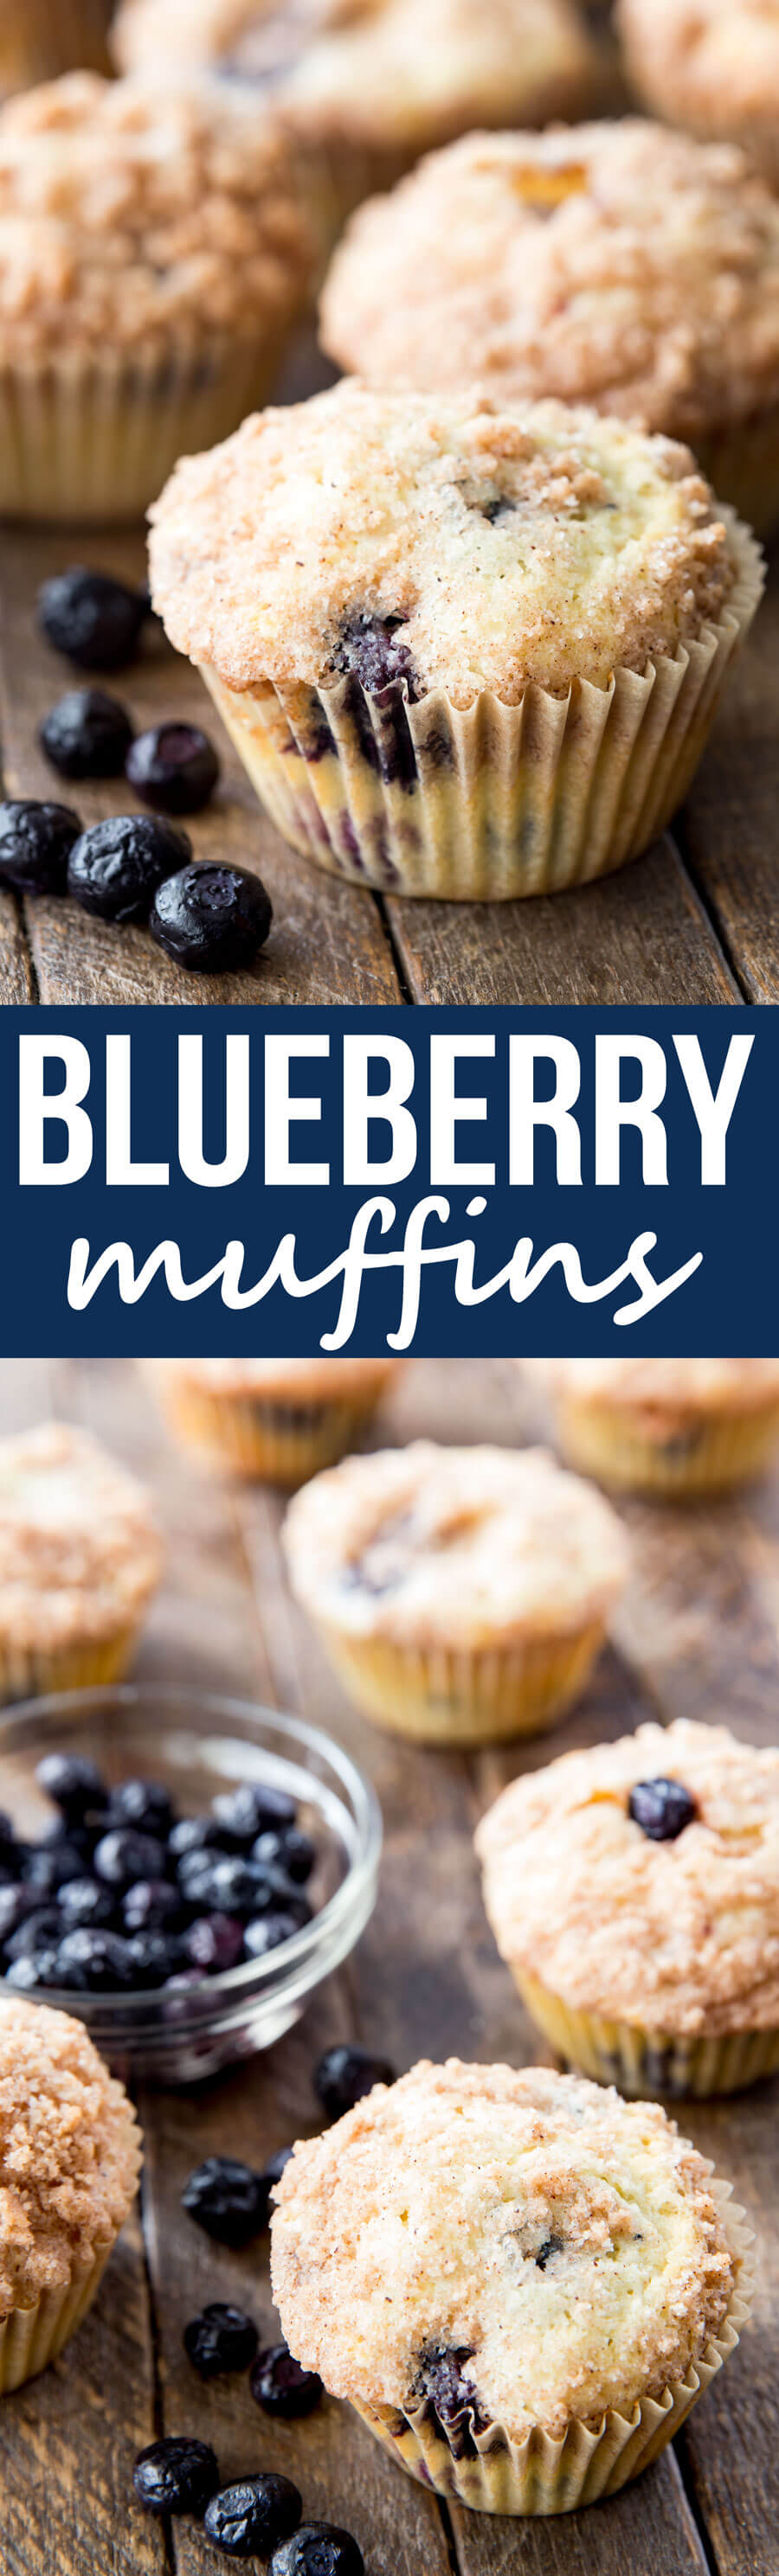 Blueberry Muffins are light, flaky and oh so delicious